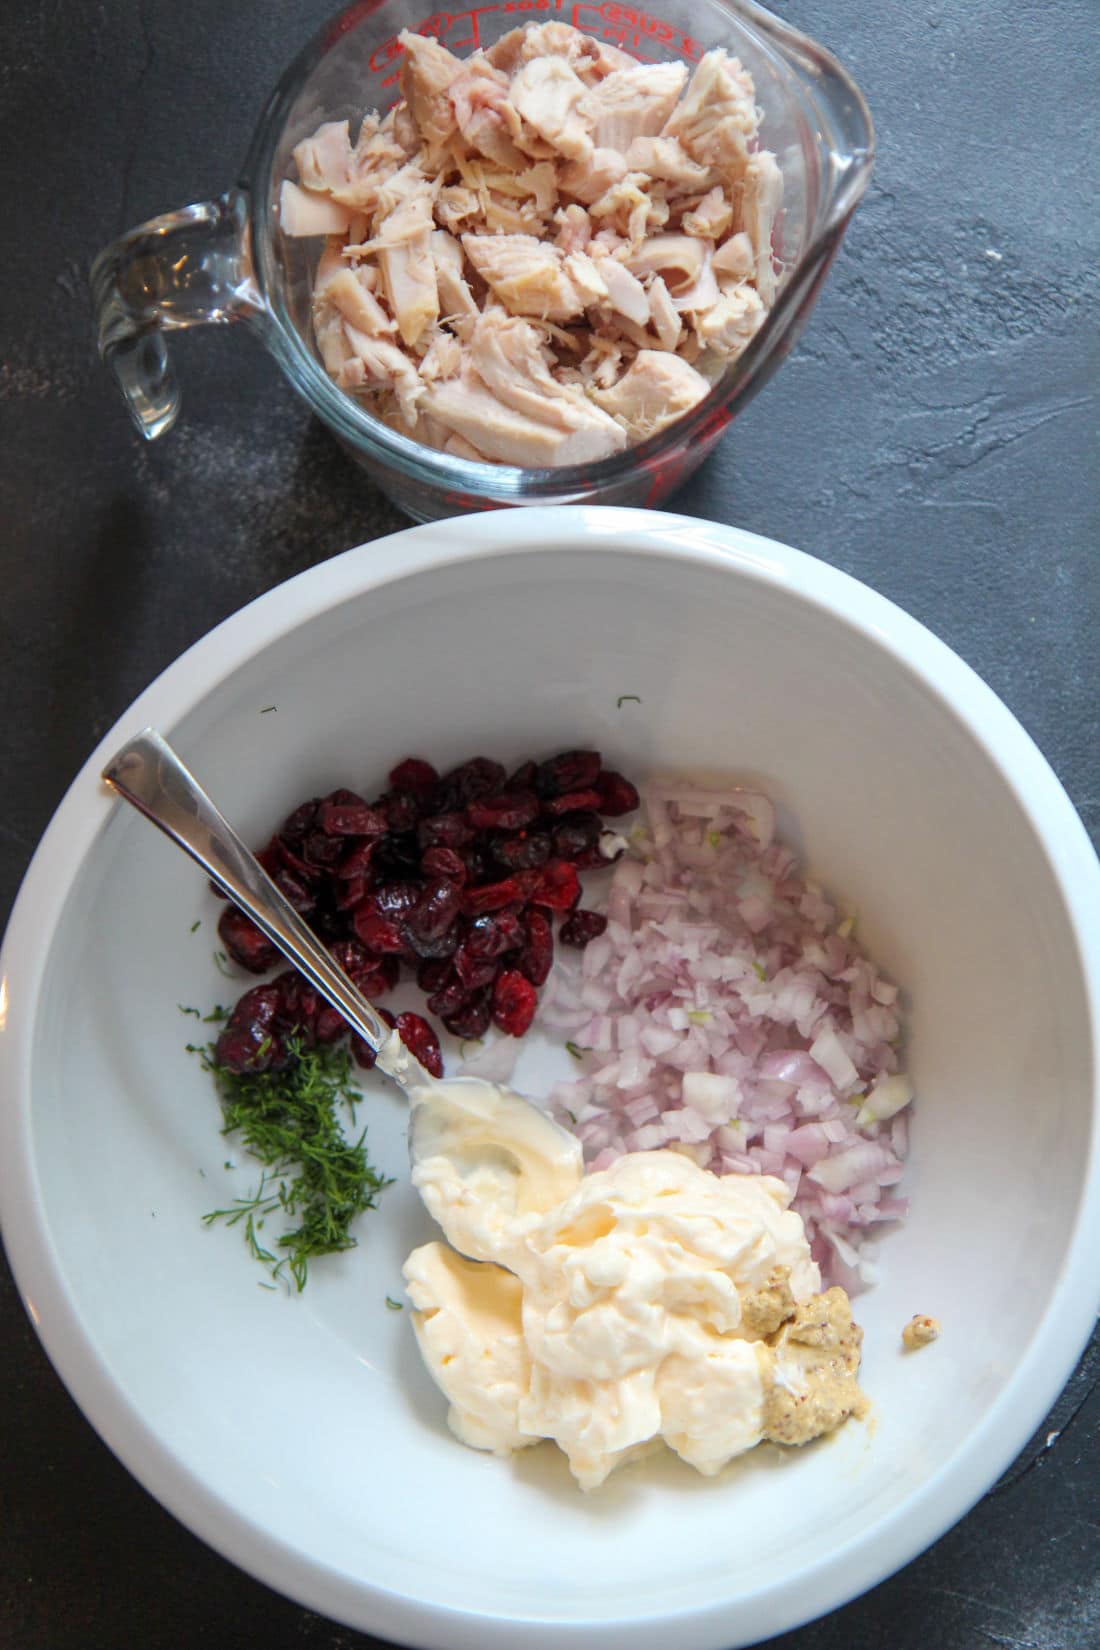 mayo, shallots, cranberries, and dill in a while bowl with a spoon and chicken in a cup